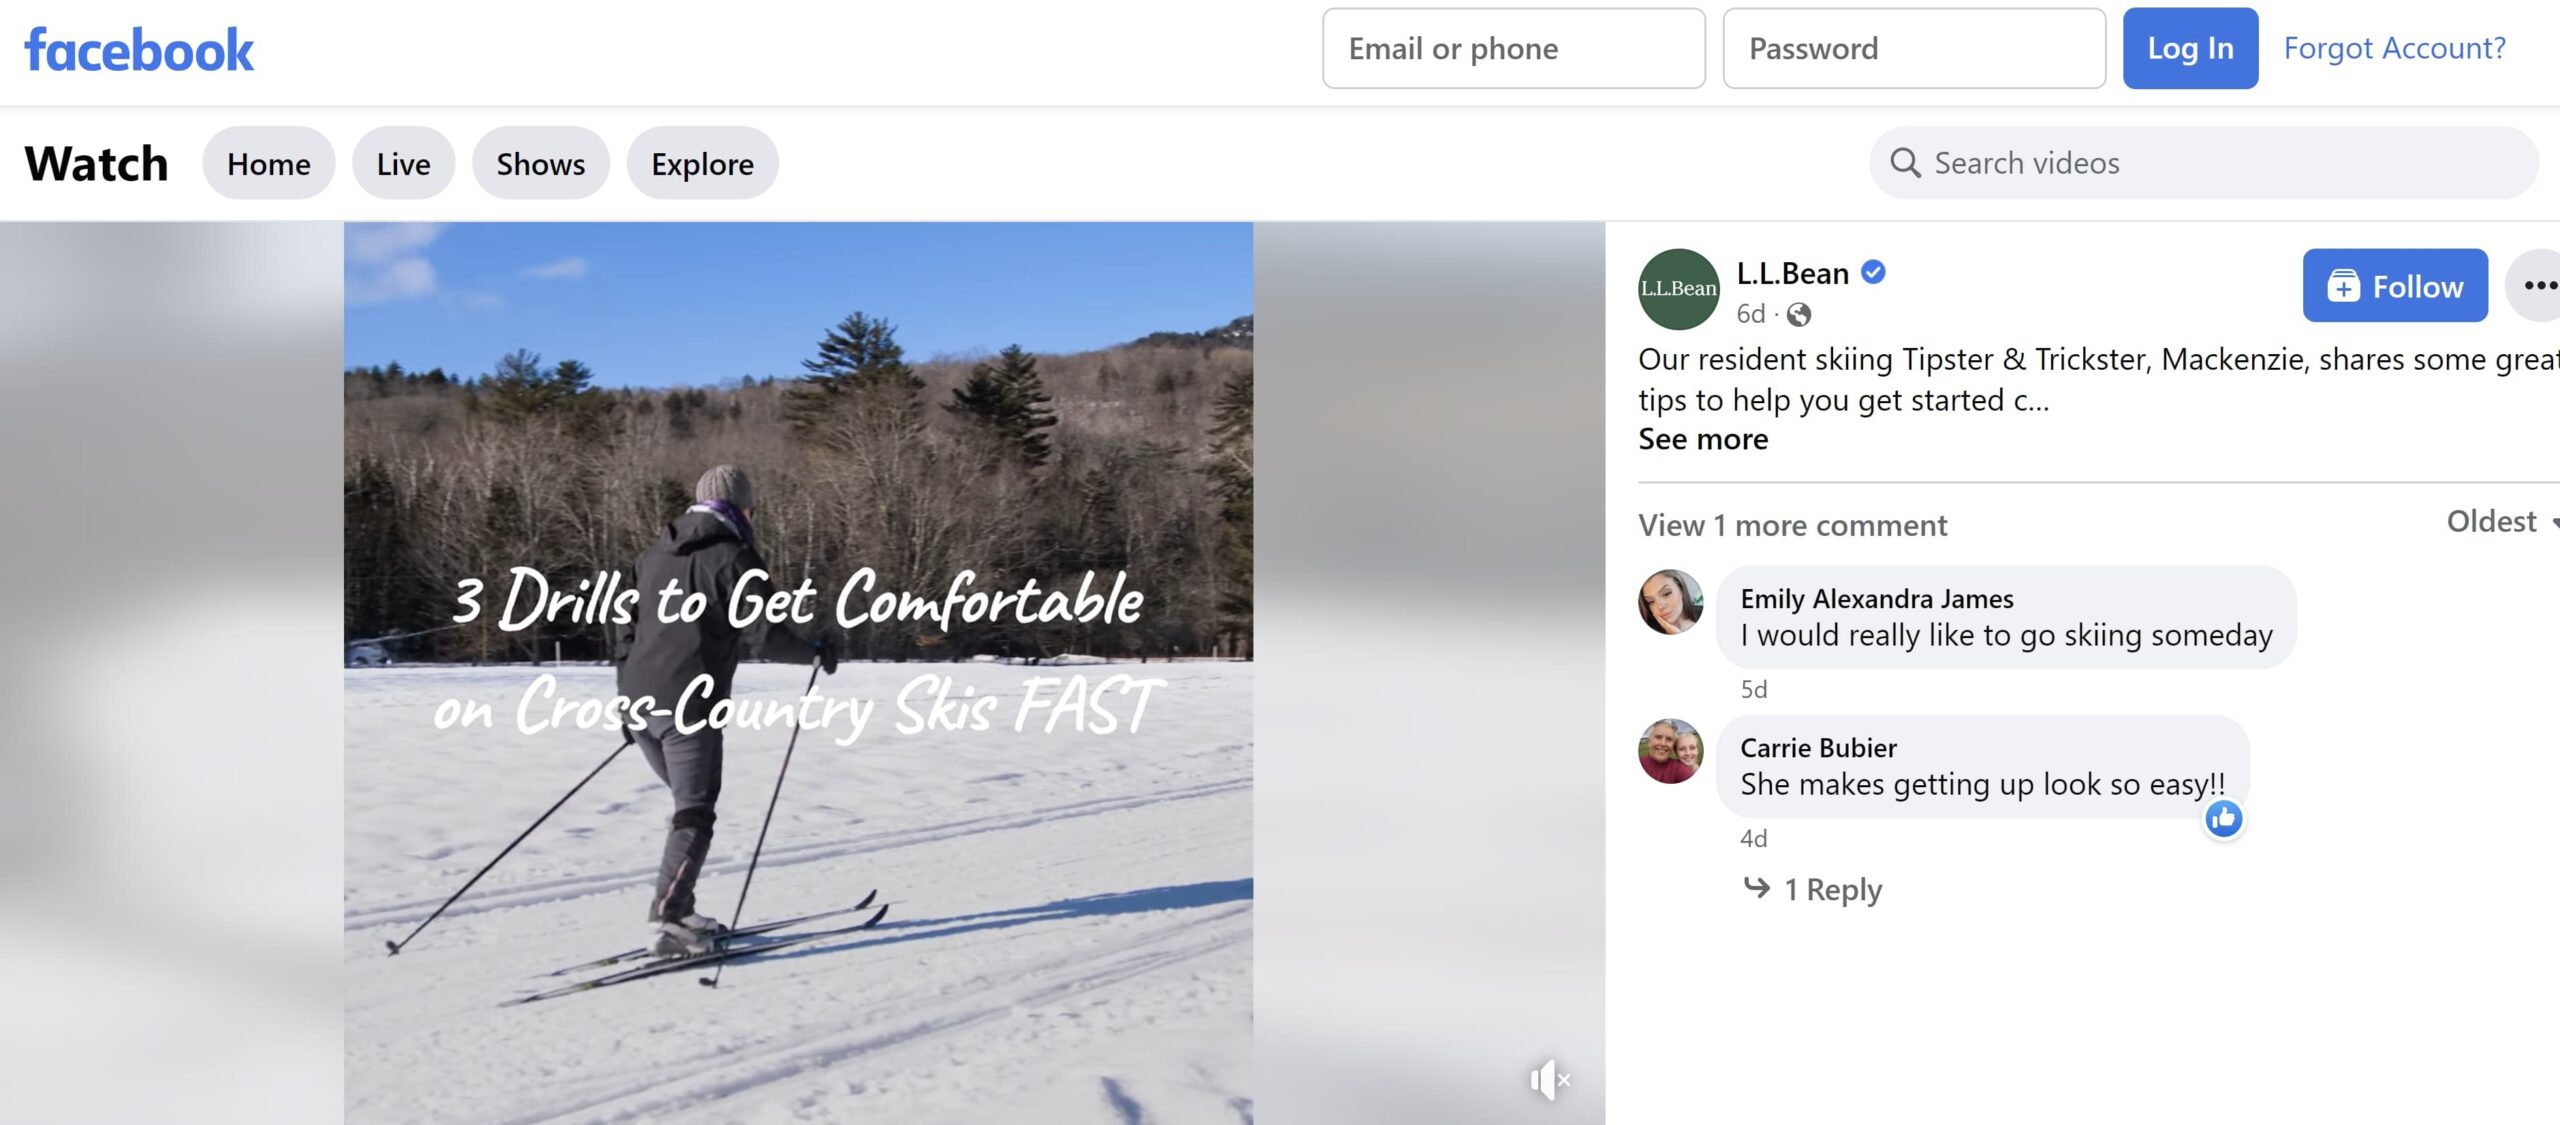 A how-to video about skiing boosts Facebook engagement for L.L. Bean.